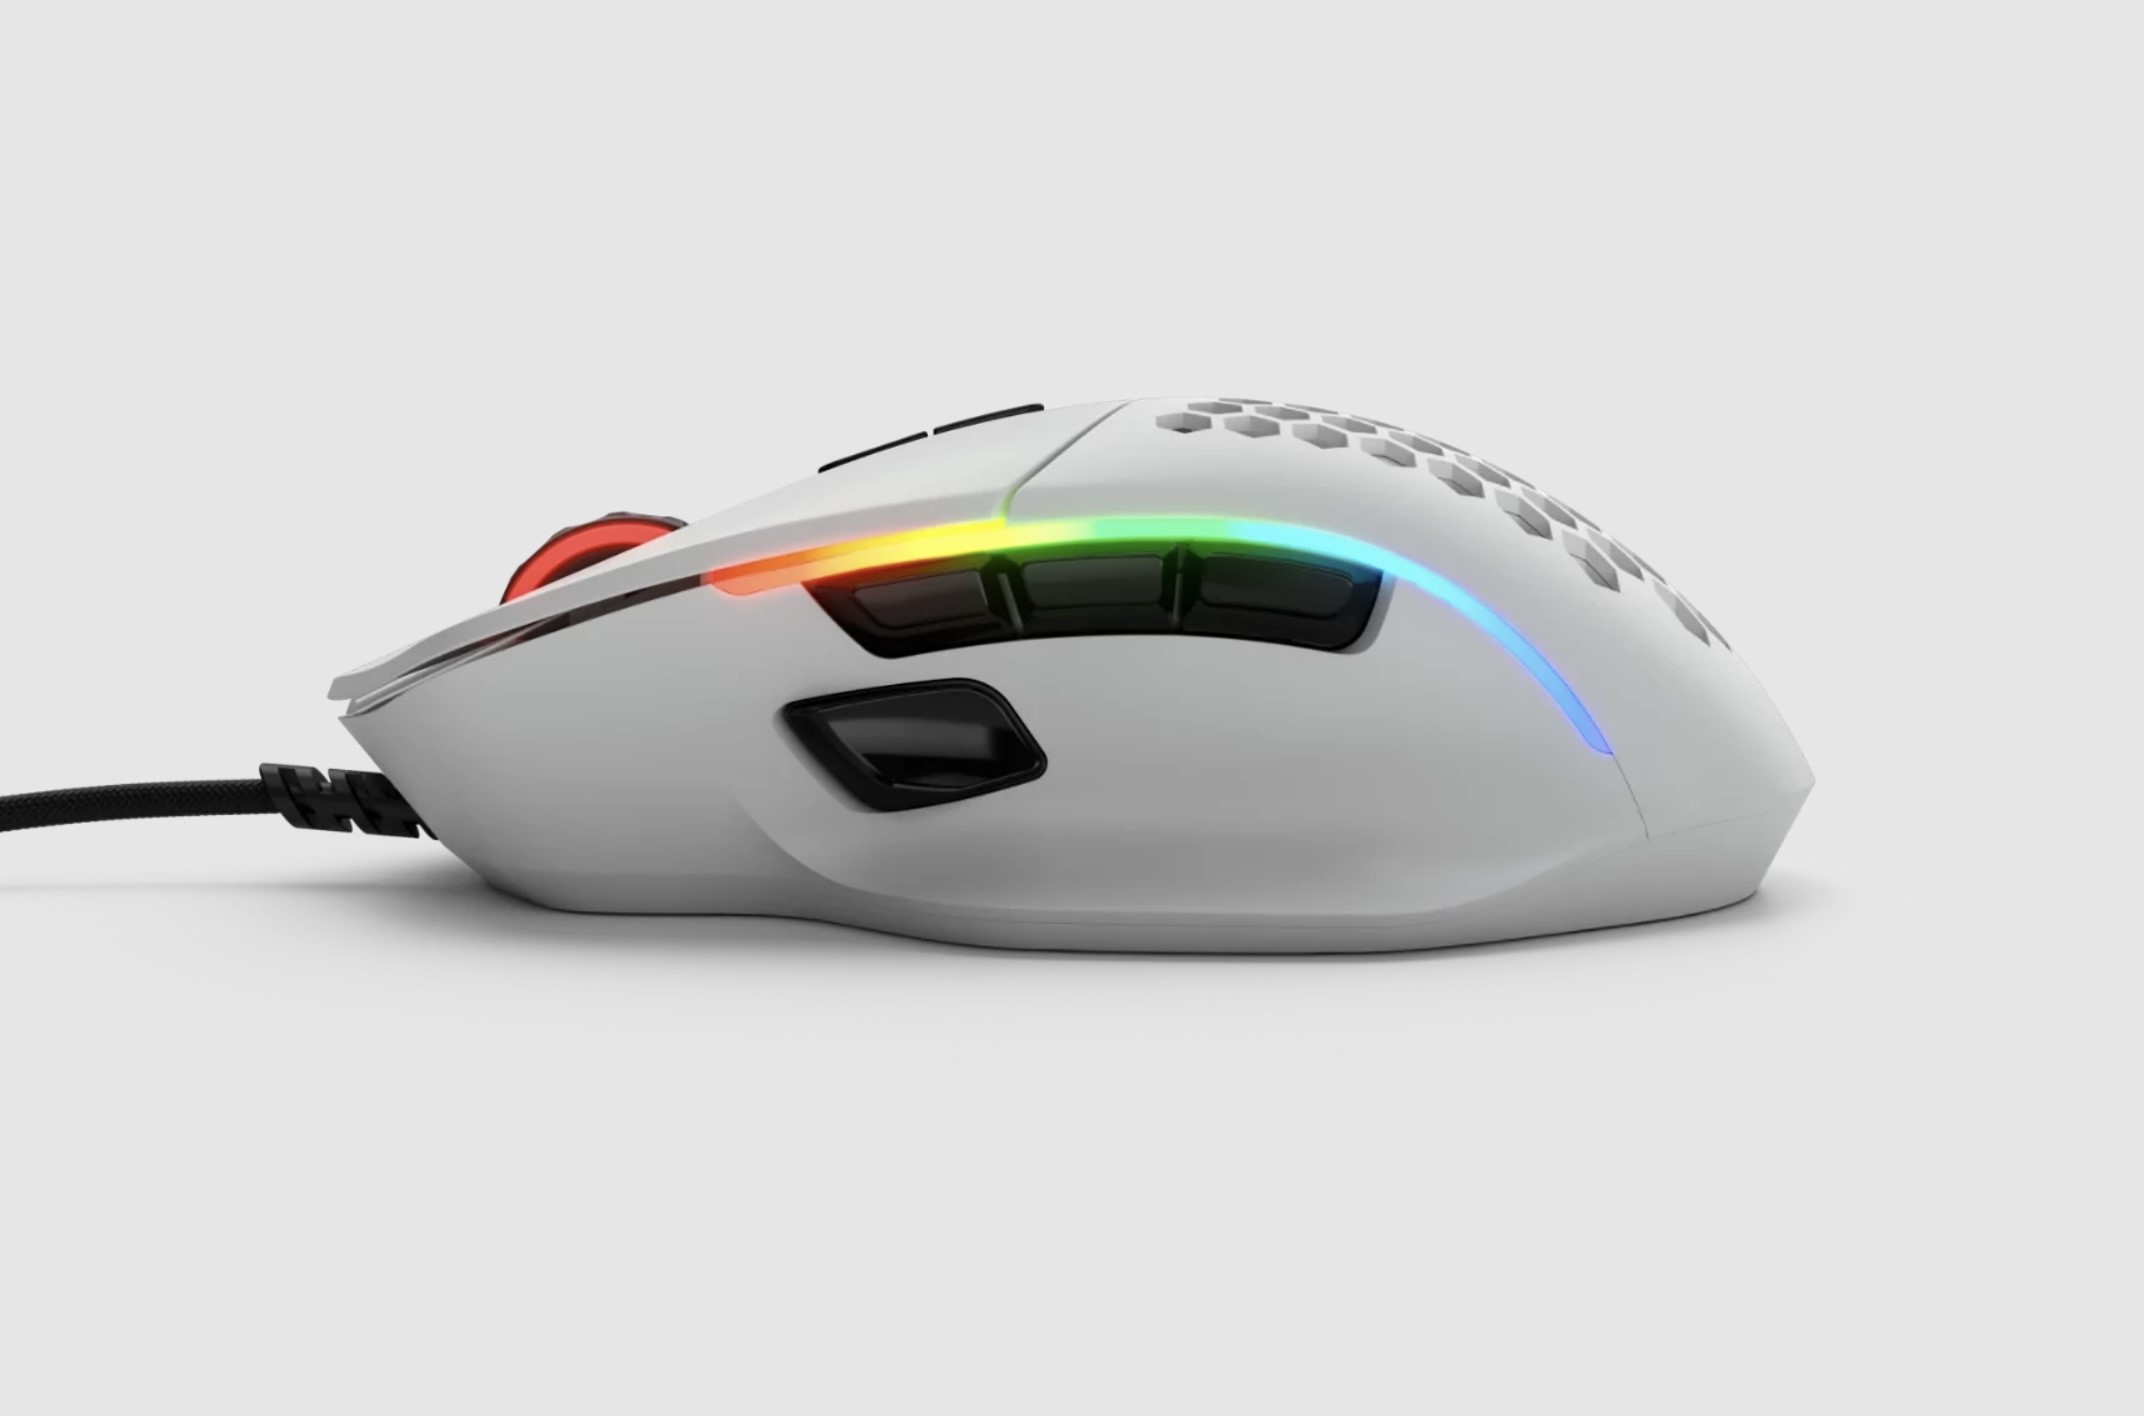 Gaming Mouse: How To Get All Buttons Working